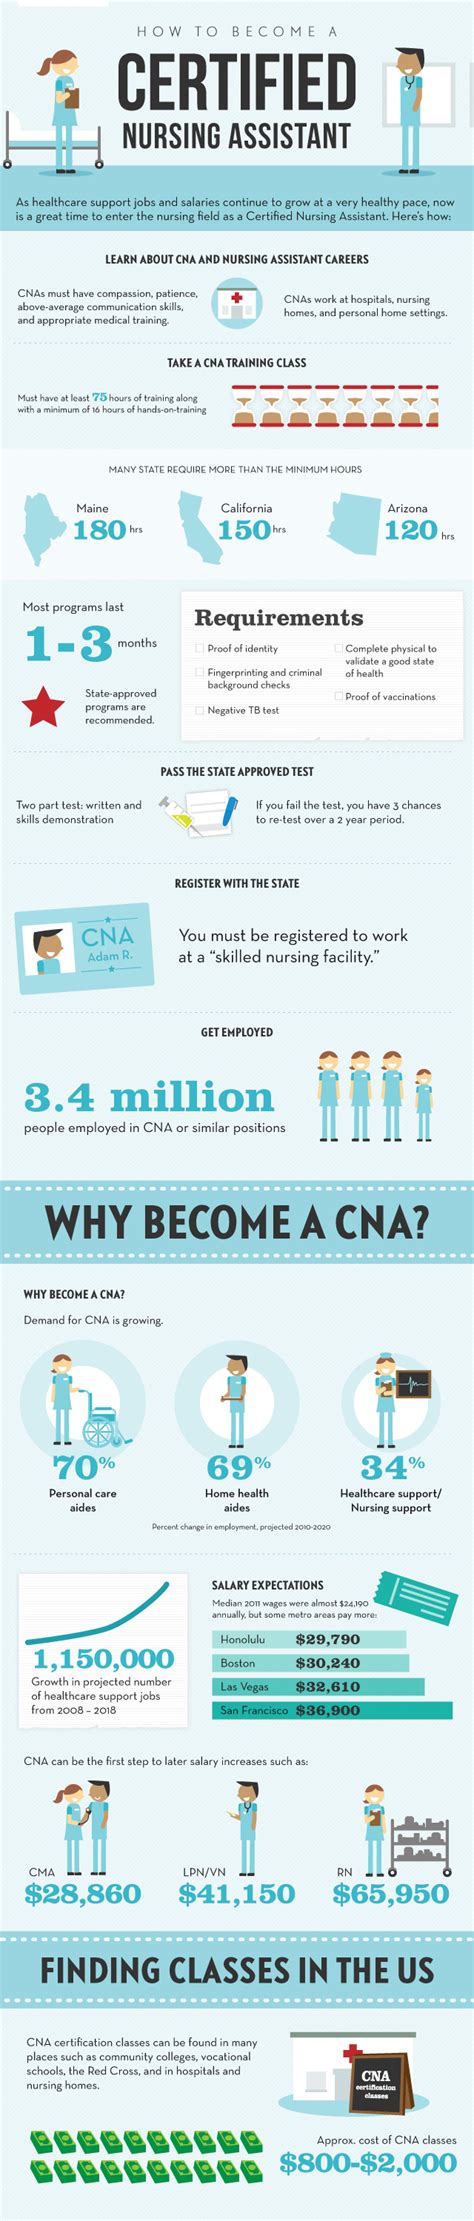 How To Become A Cna Infographic Cna Classes Online